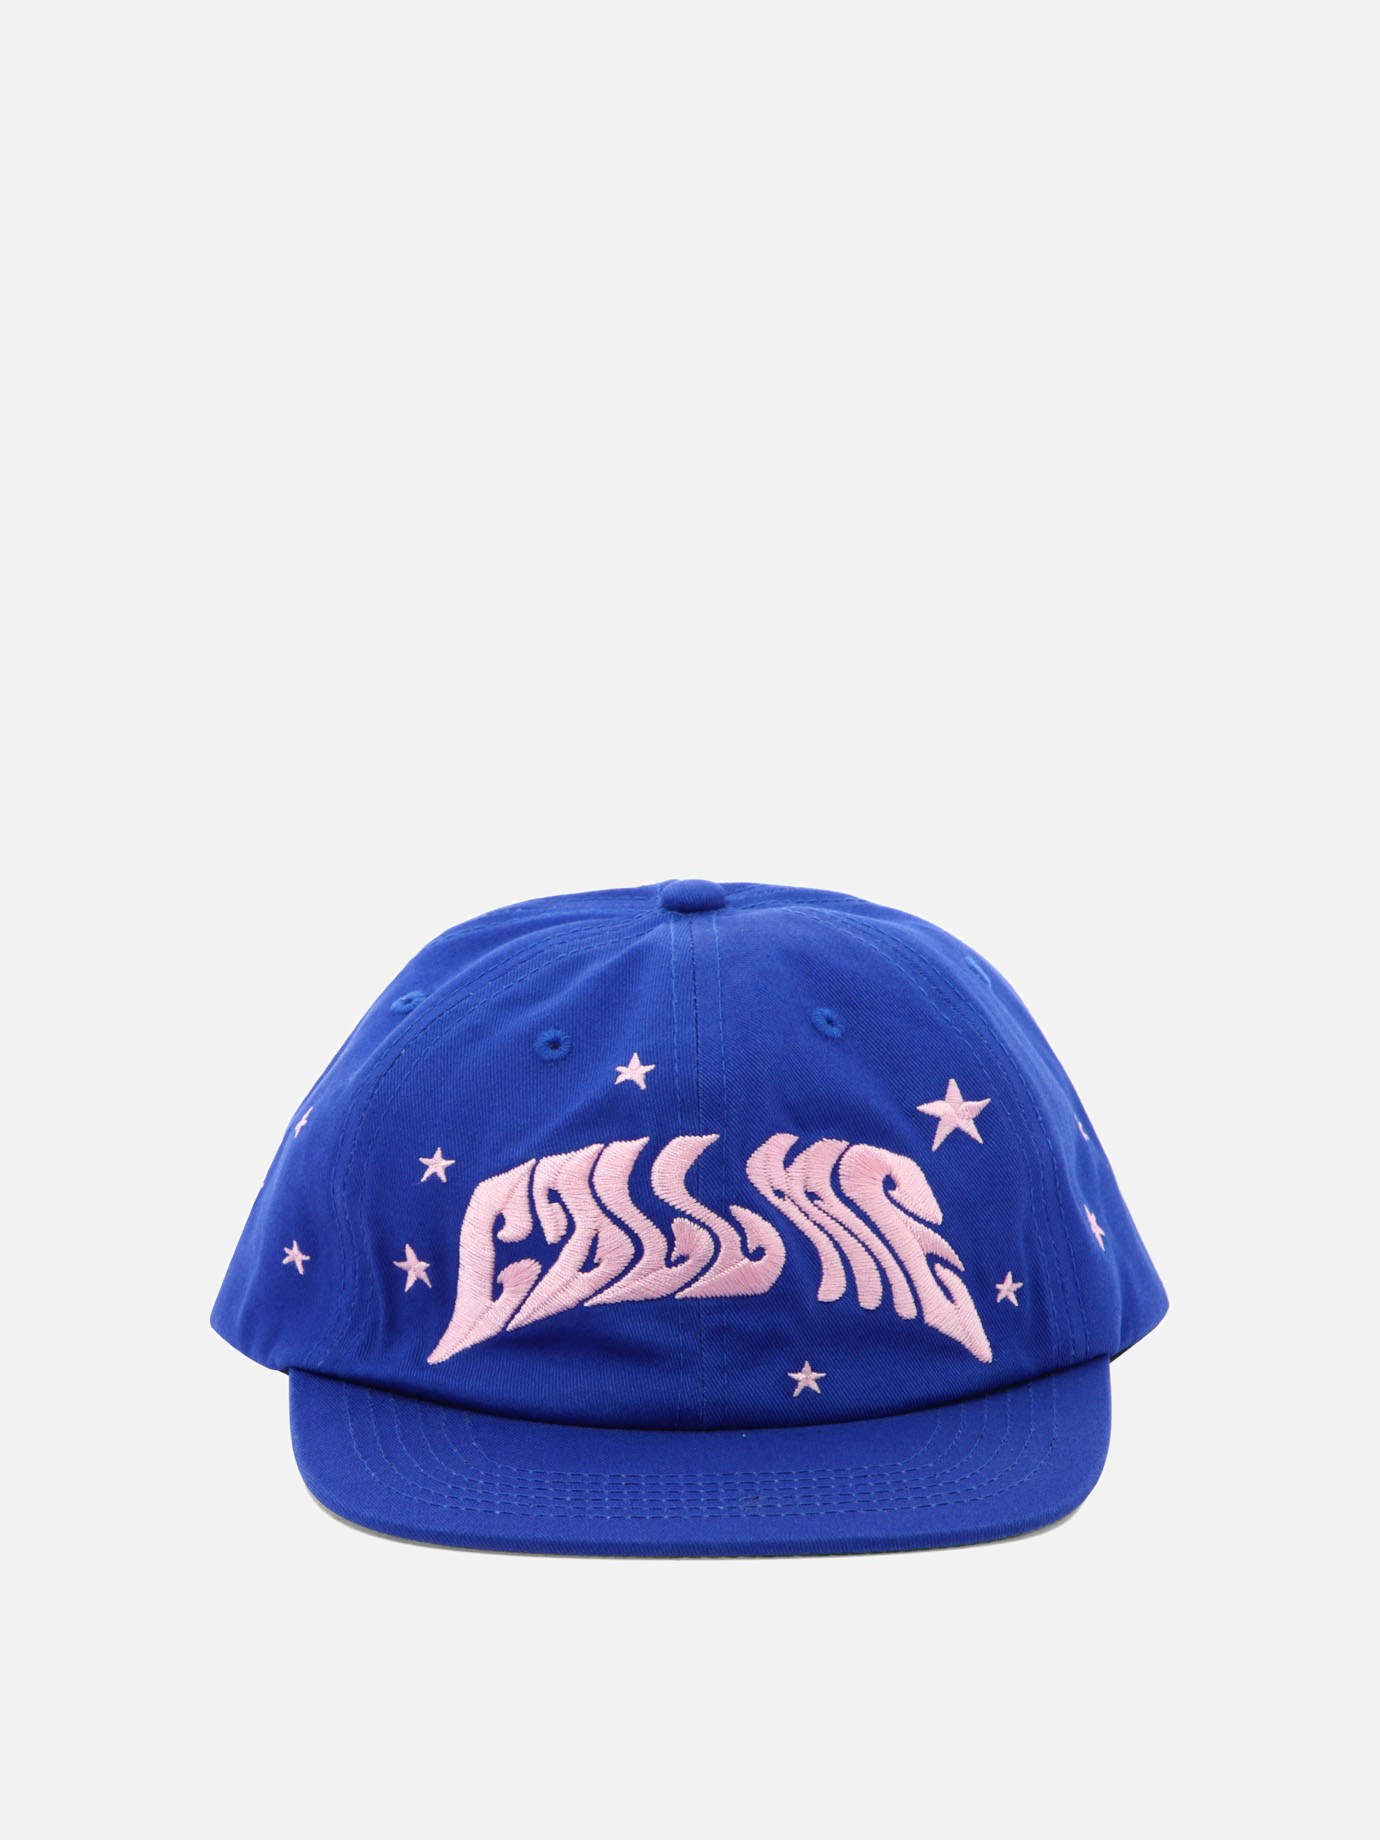 Cappellino  Stars Blue Snapback by Call Me 917 - 4